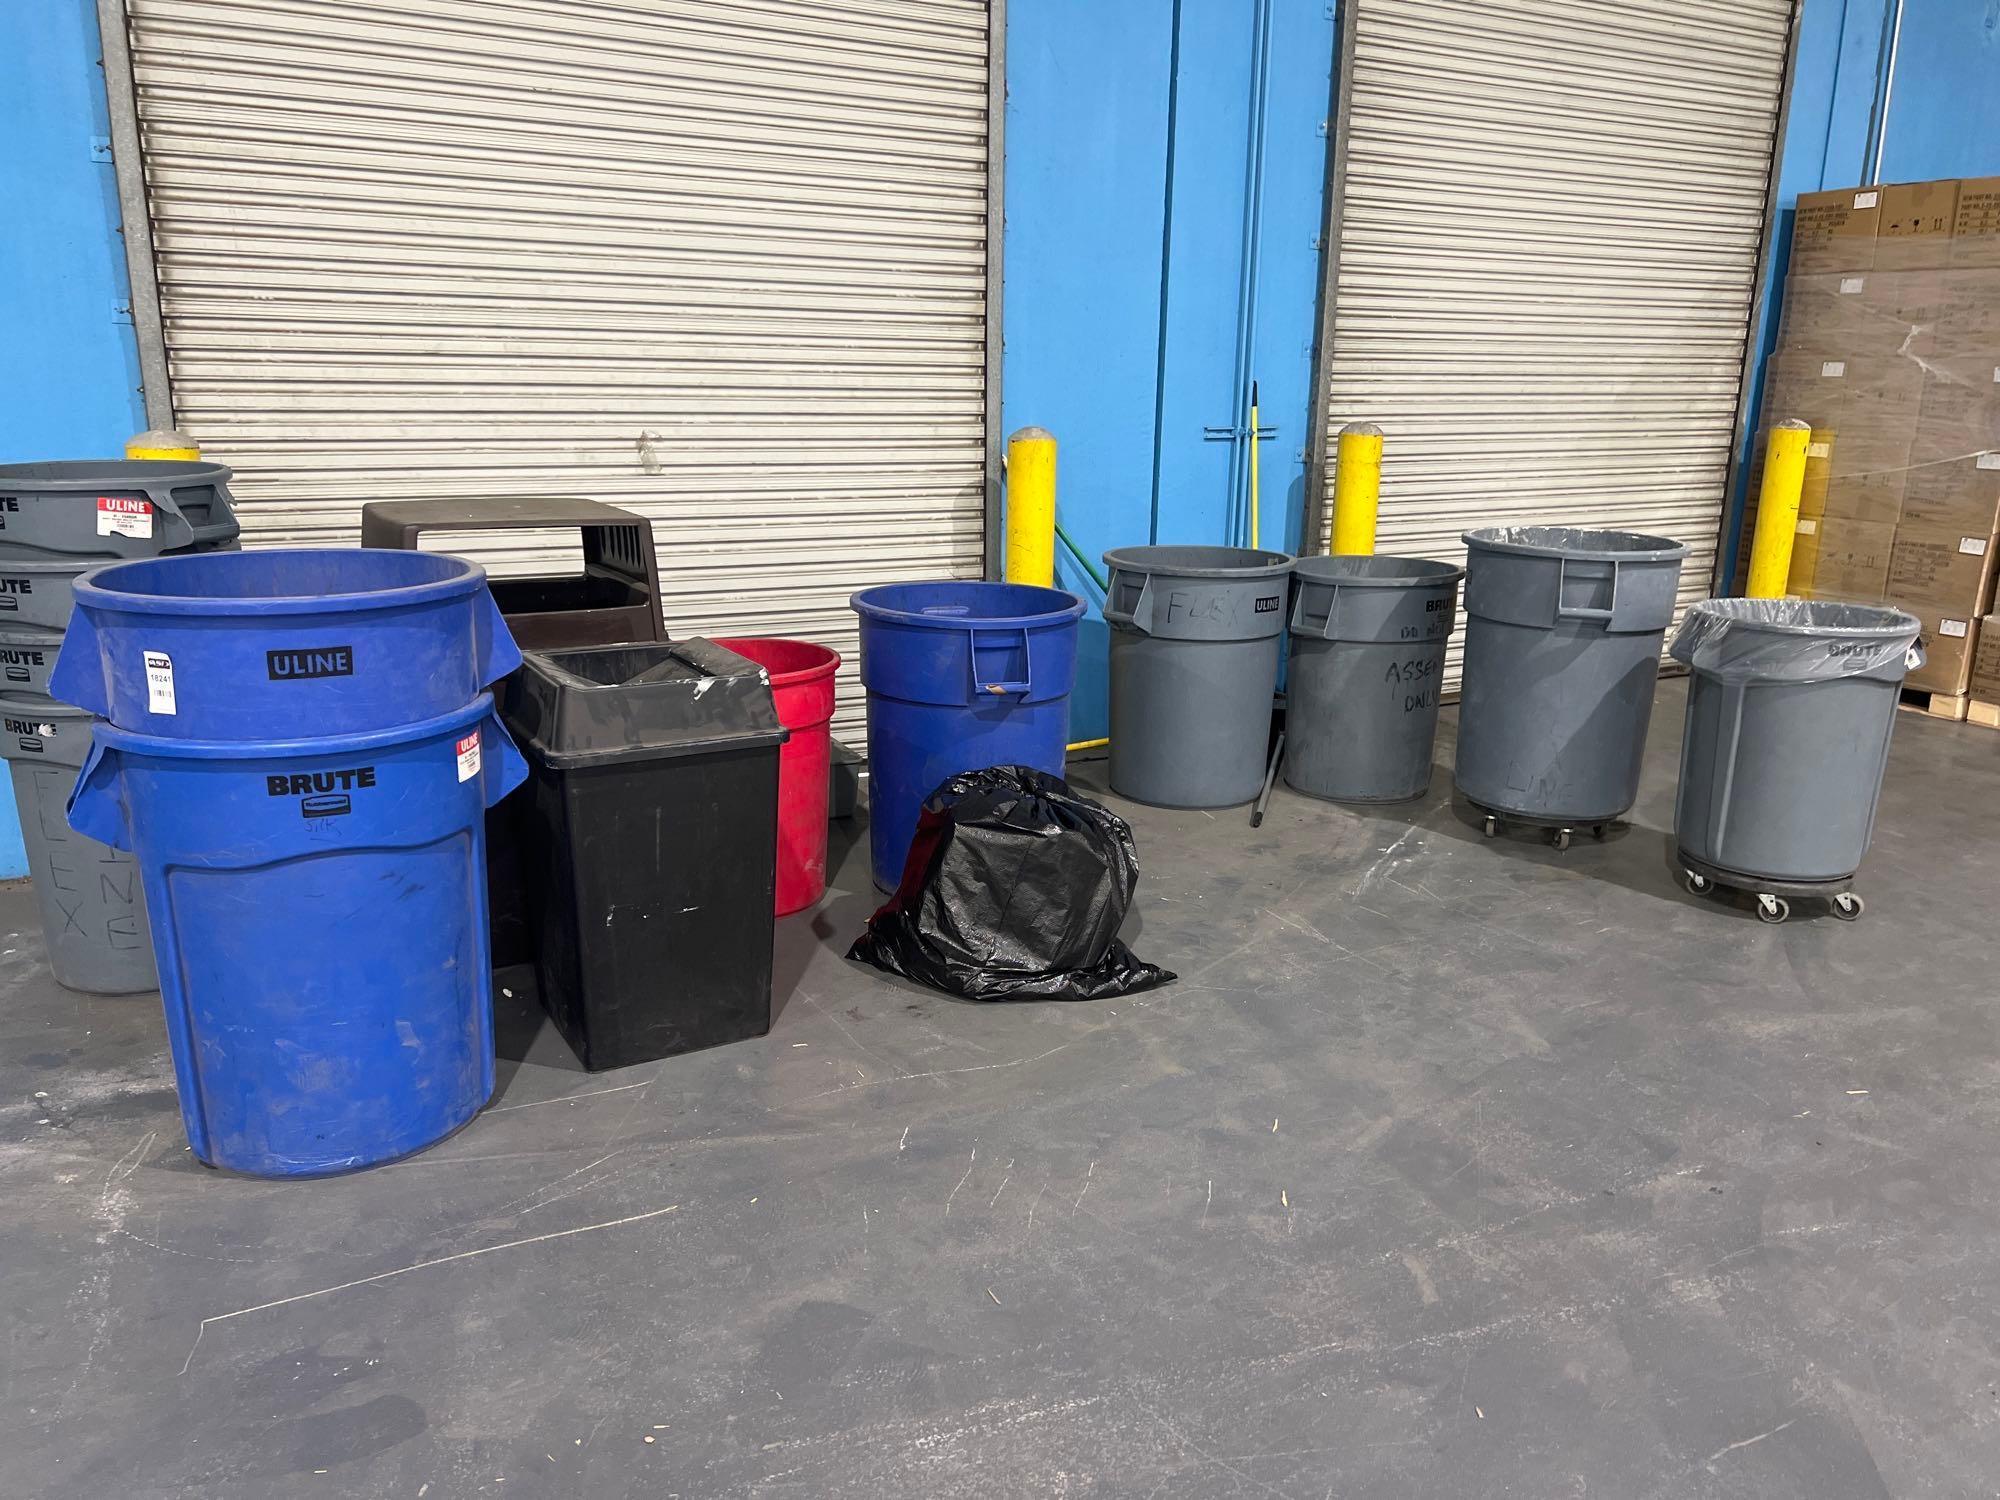 ASSORTED TRASH CANS. (ULINE/BRUTE)